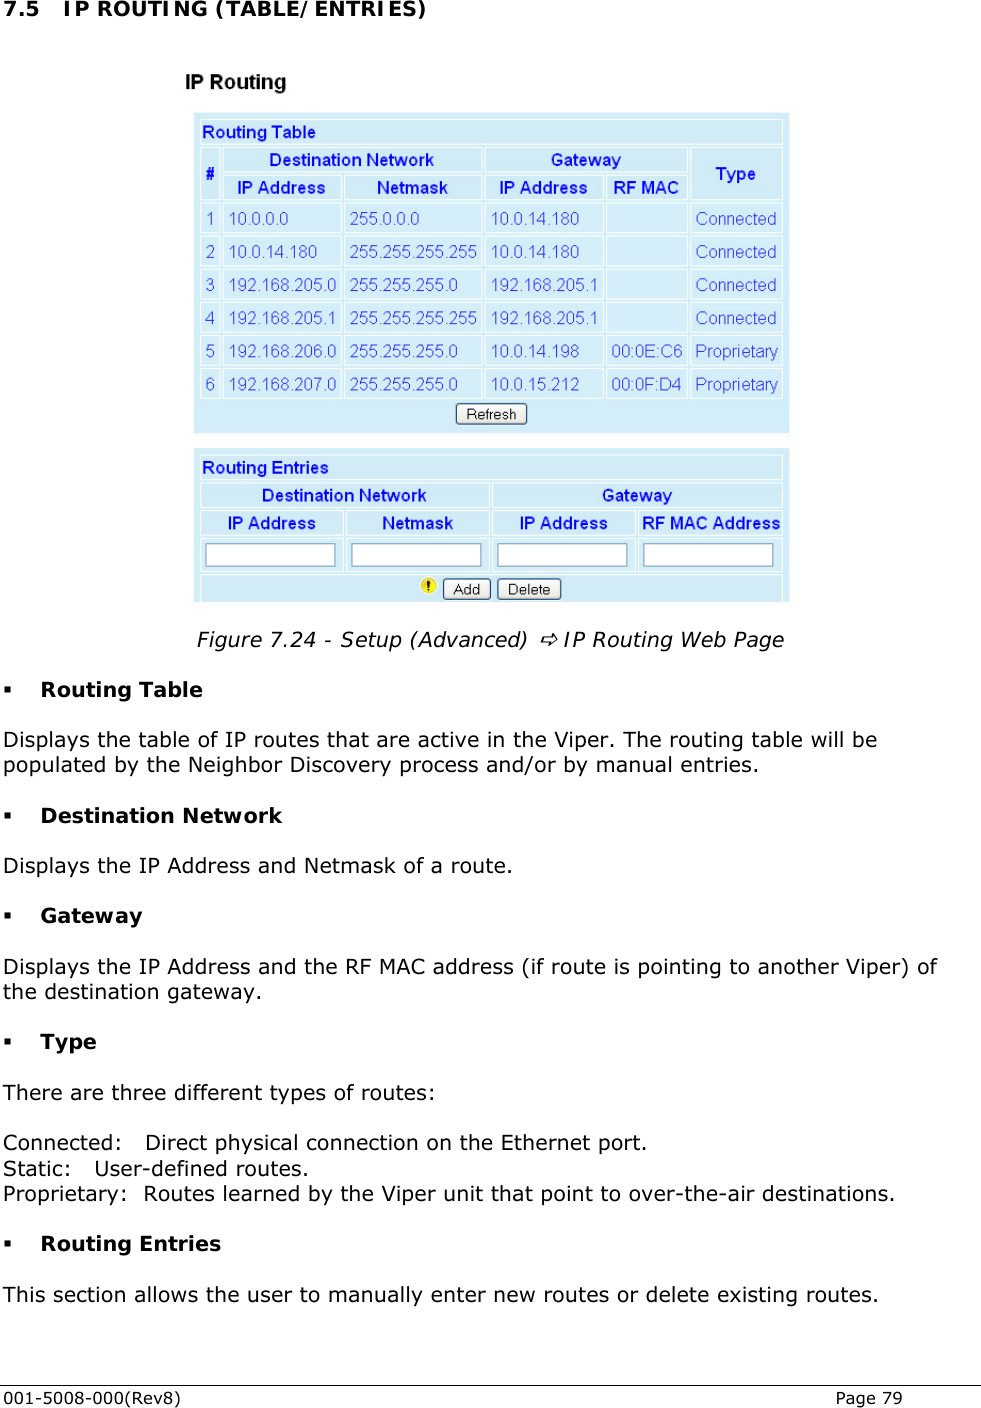   5 IP ROUTING (TABLE/ENTRIES)  7. Figure 7.24 - Setup (Advanced) D IP Routing Web Page  Routing Table Displays the table of IP routes that are active in the Viper. The routing table will be populated by the Neighbor Discovery process and/or by manual entries.    Destination Network  Displays the IP Address and Netmask of a route.   Gateway  Displays the IP Address and the RF MAC address (if route is pointing to another Viper) of the destination gateway.  Type  There are three different types of routes:   Connected:   Direct physical connection on the Ethernet port. Static:   User-defined routes.  Proprietary:  Routes learned by the Viper unit that point to over-the-air destinations.    Routing Entries This section allows the user to manually enter new routes or delete existing routes. 001-5008-000(Rev8)   Page 79 